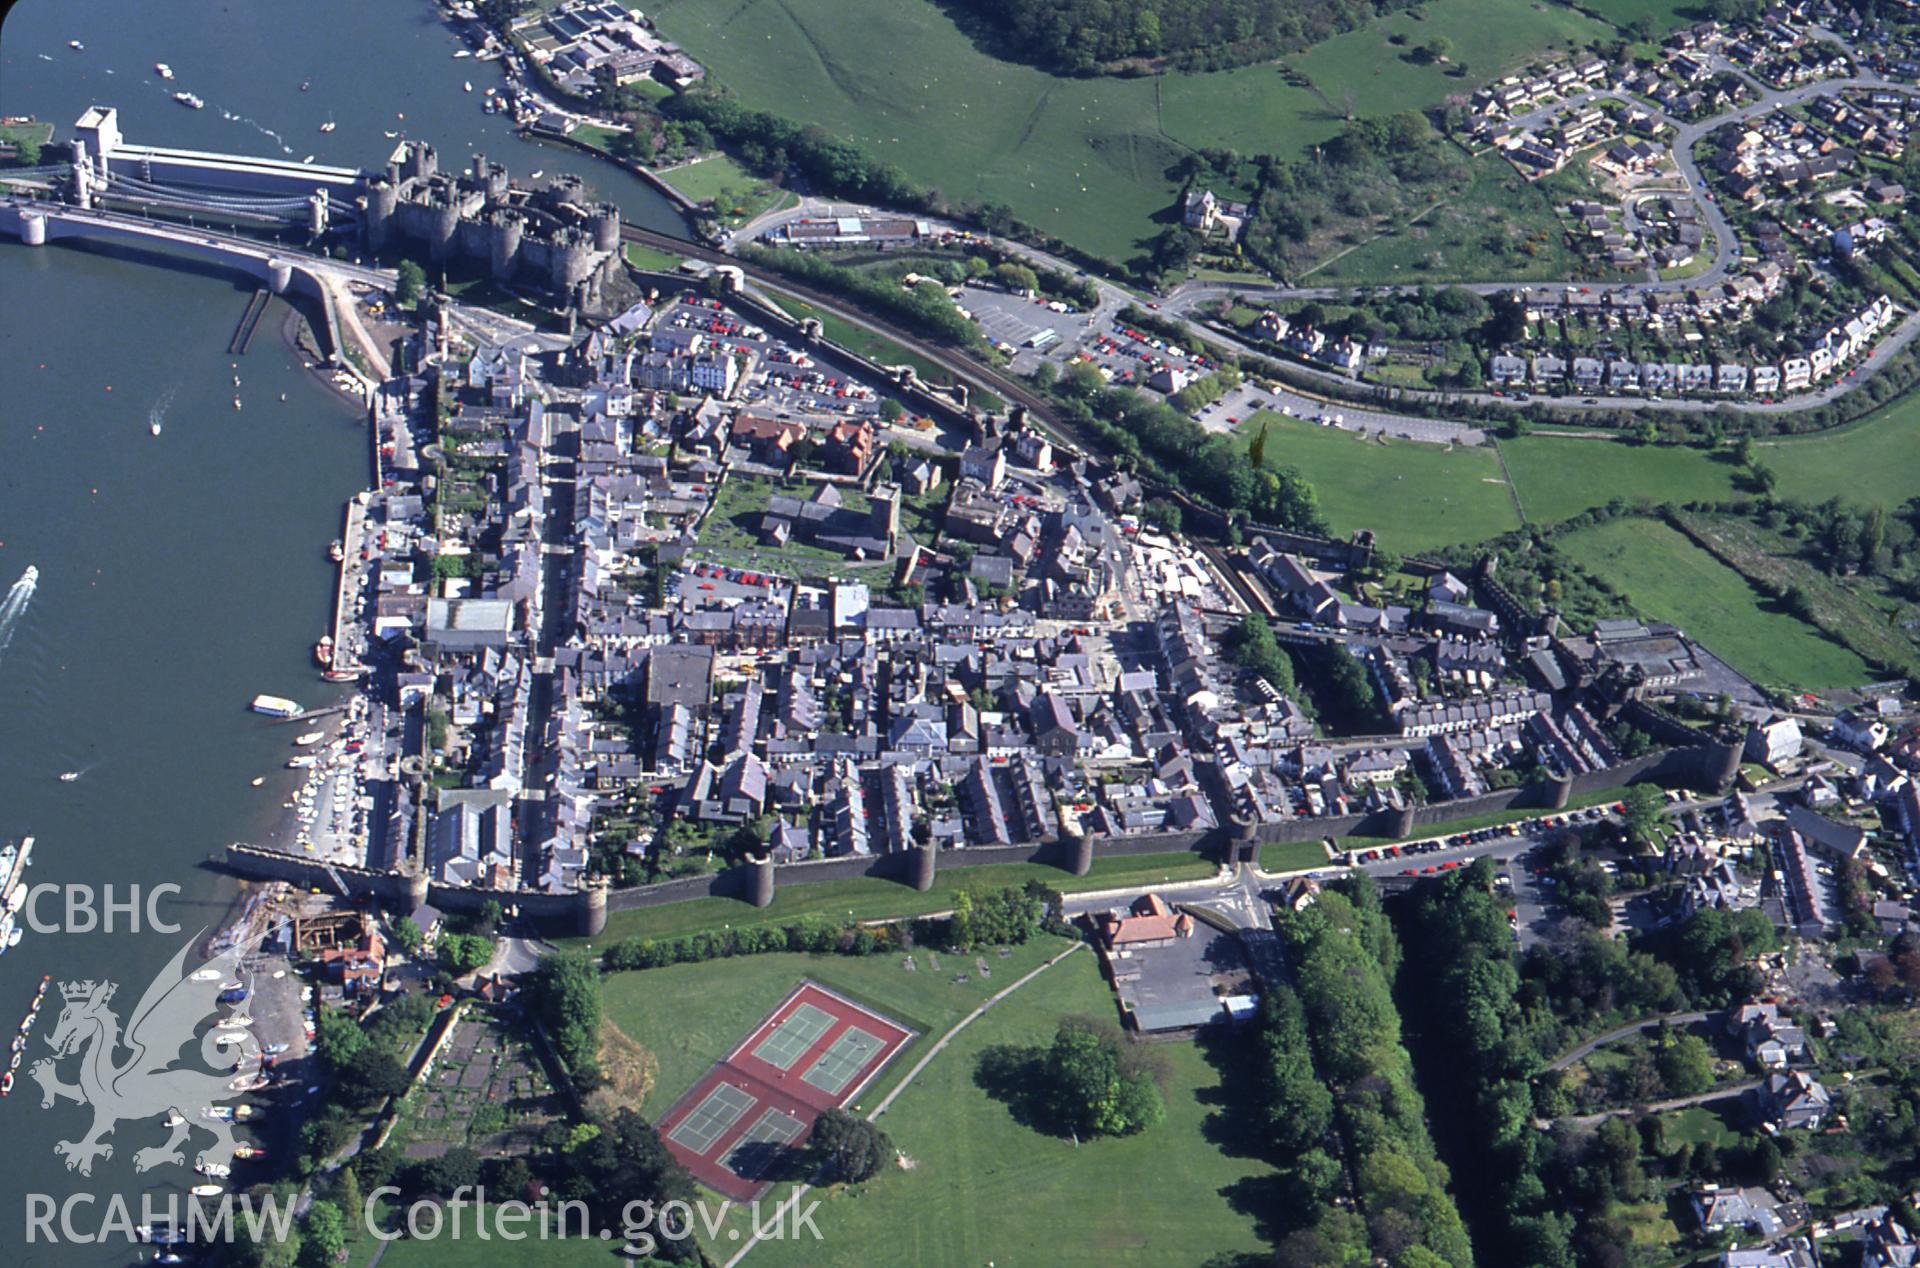 RCAHMW colour slide oblique aerial photograph of Conwy, Conwy, taken by C.R. Musson, 30/04/94